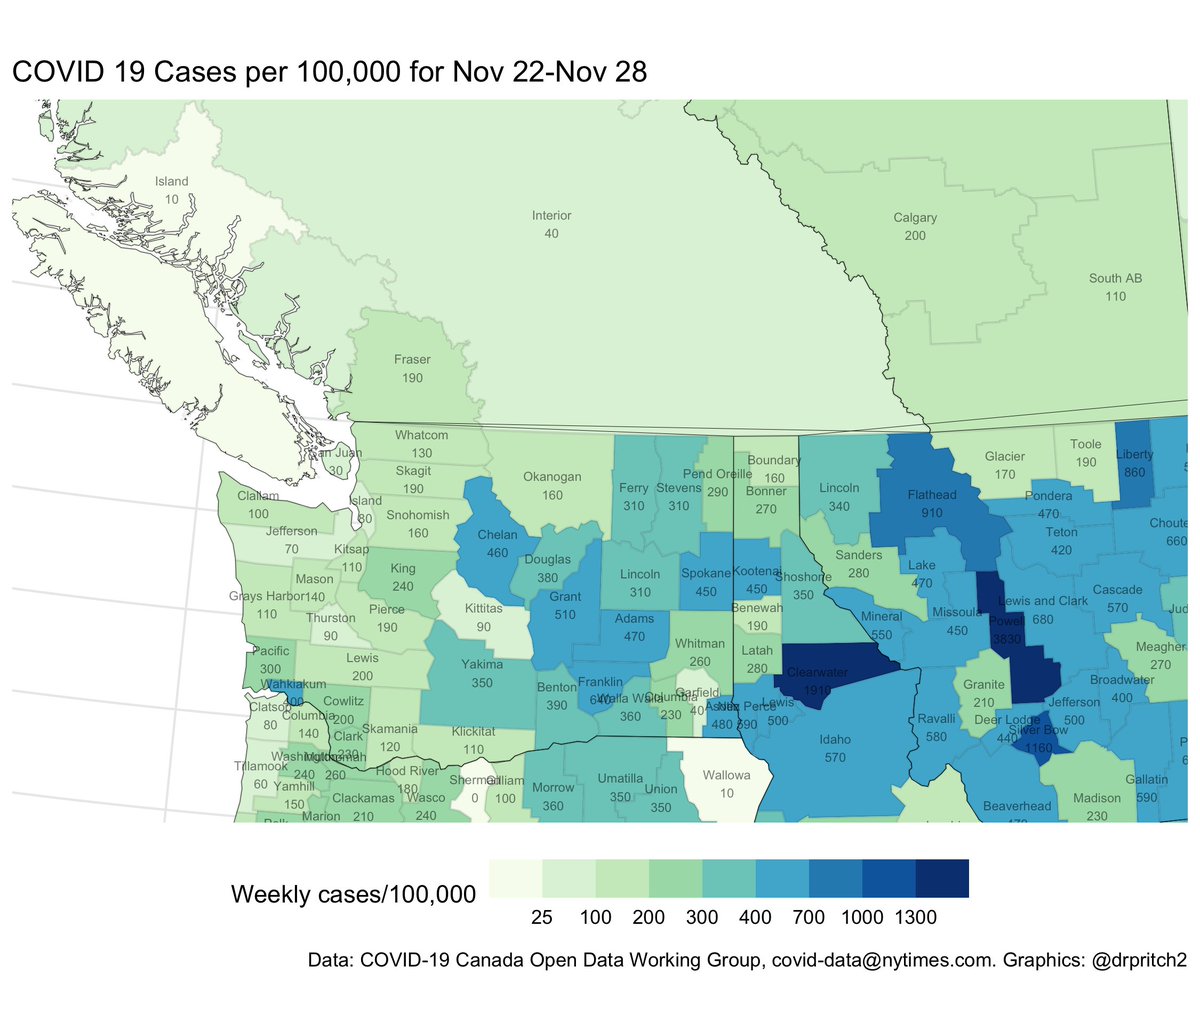 8/ Bonus map: BC.Washington state's as bad as it's been. North of Seattle (Snohomish, Skagit_) and Okanagan counties are all up 50% since Thanksgiving. Northern Idaho is back to where it was in early November, and Montana's only improving slowly.